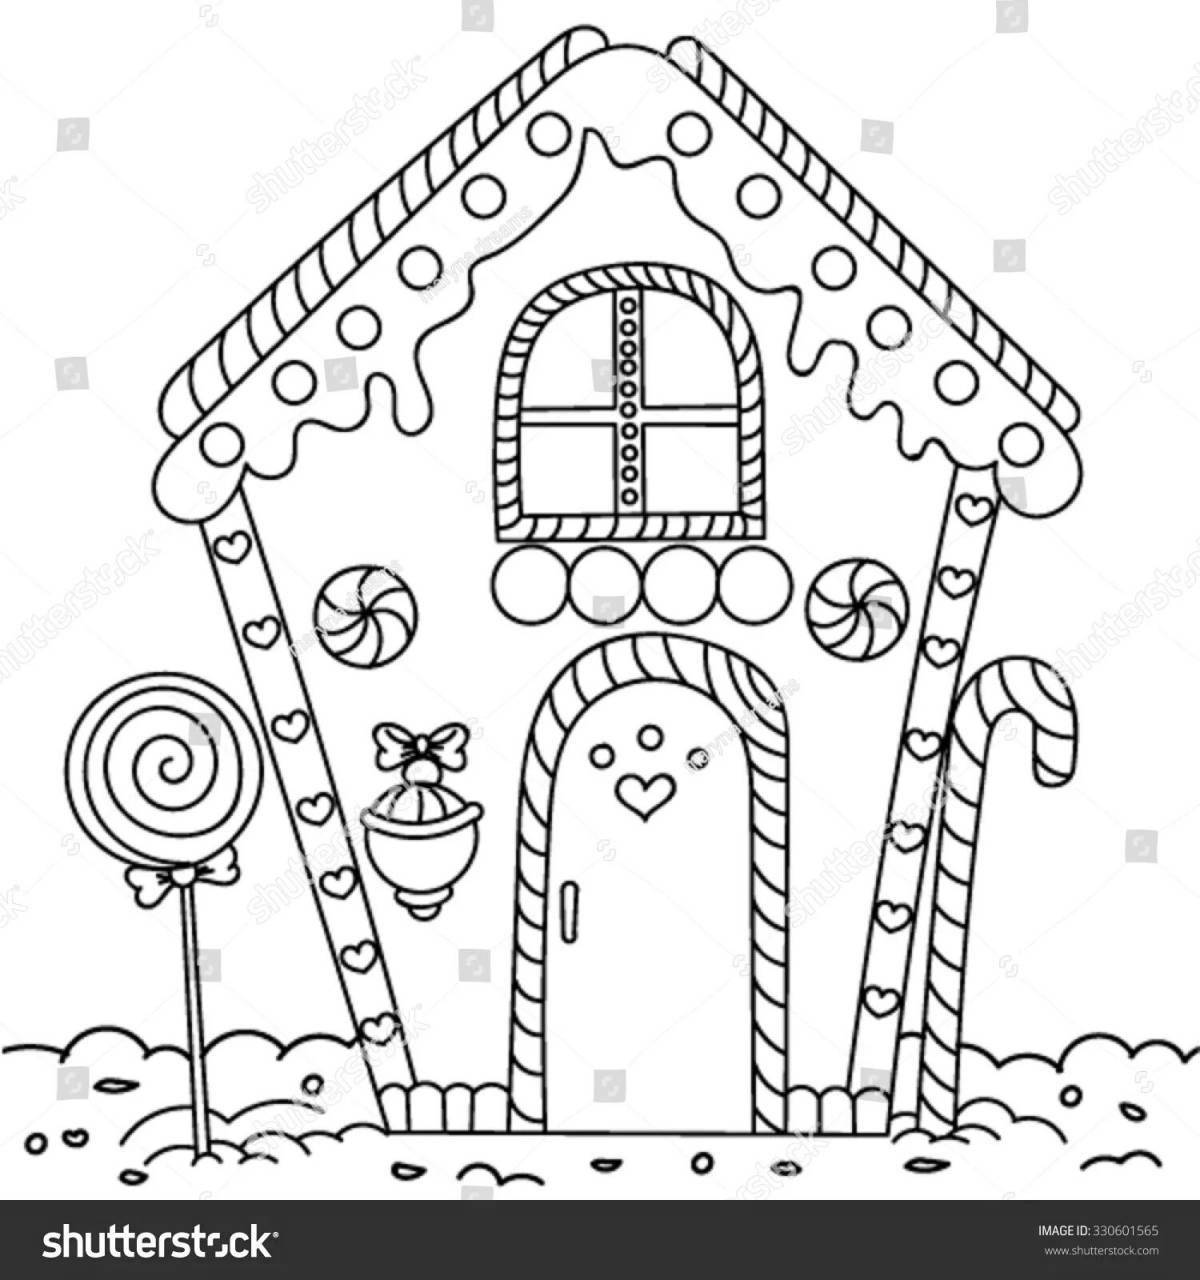 Coloring page dazzling Christmas house